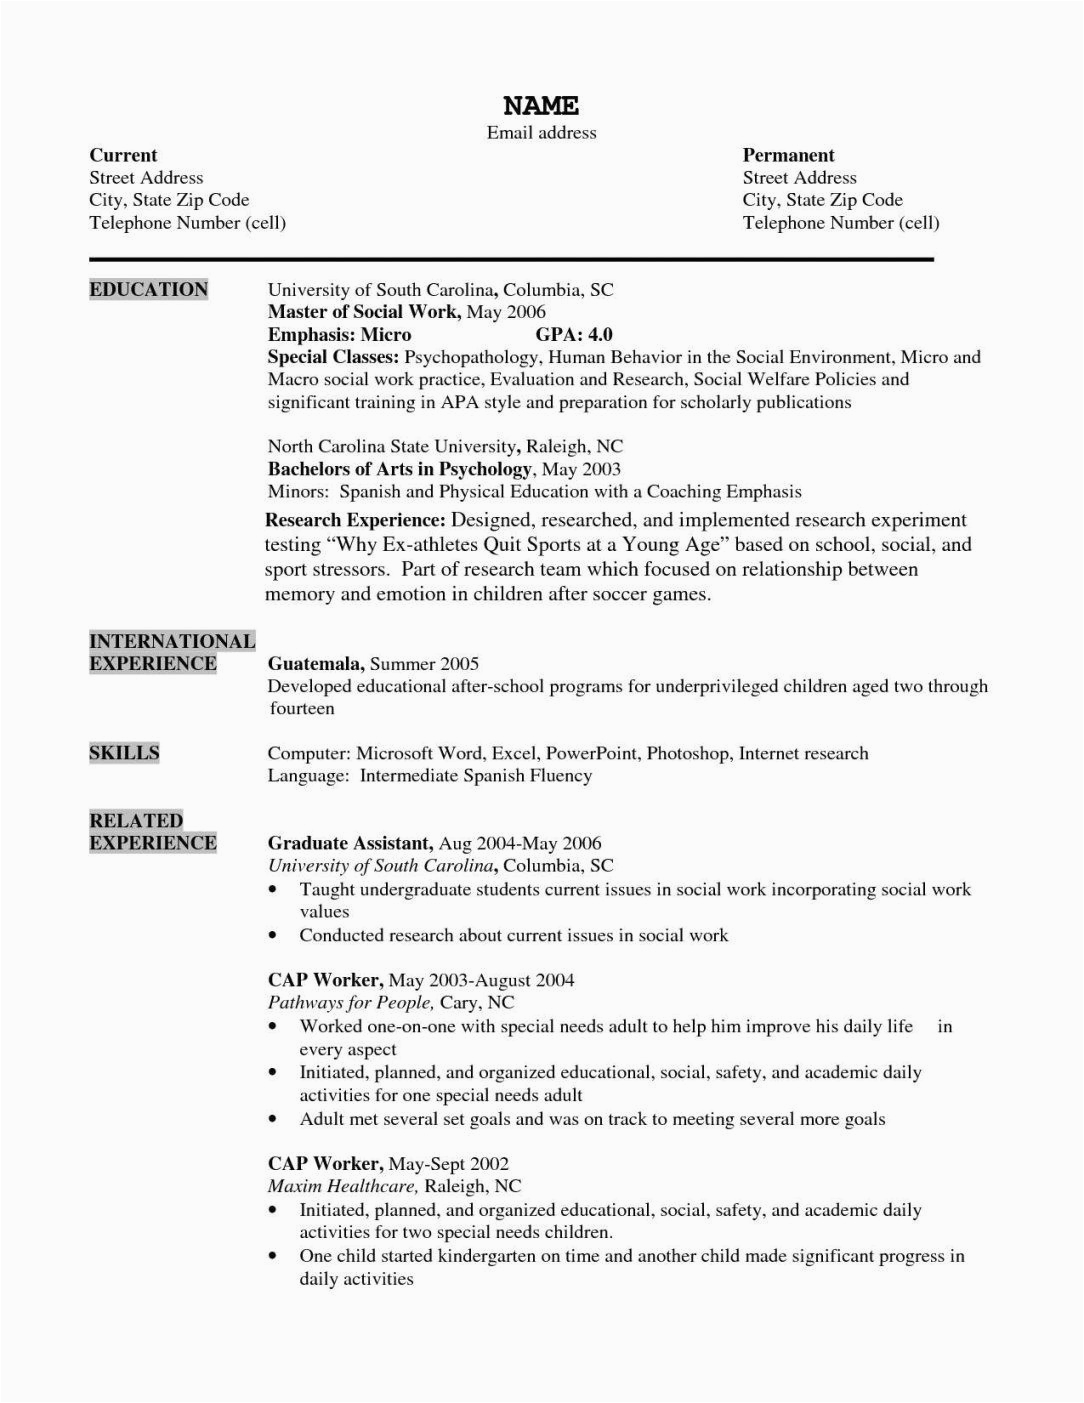 Free Resume Samples for Older Workers Free Resume Templates for Older Workers Resume Template References